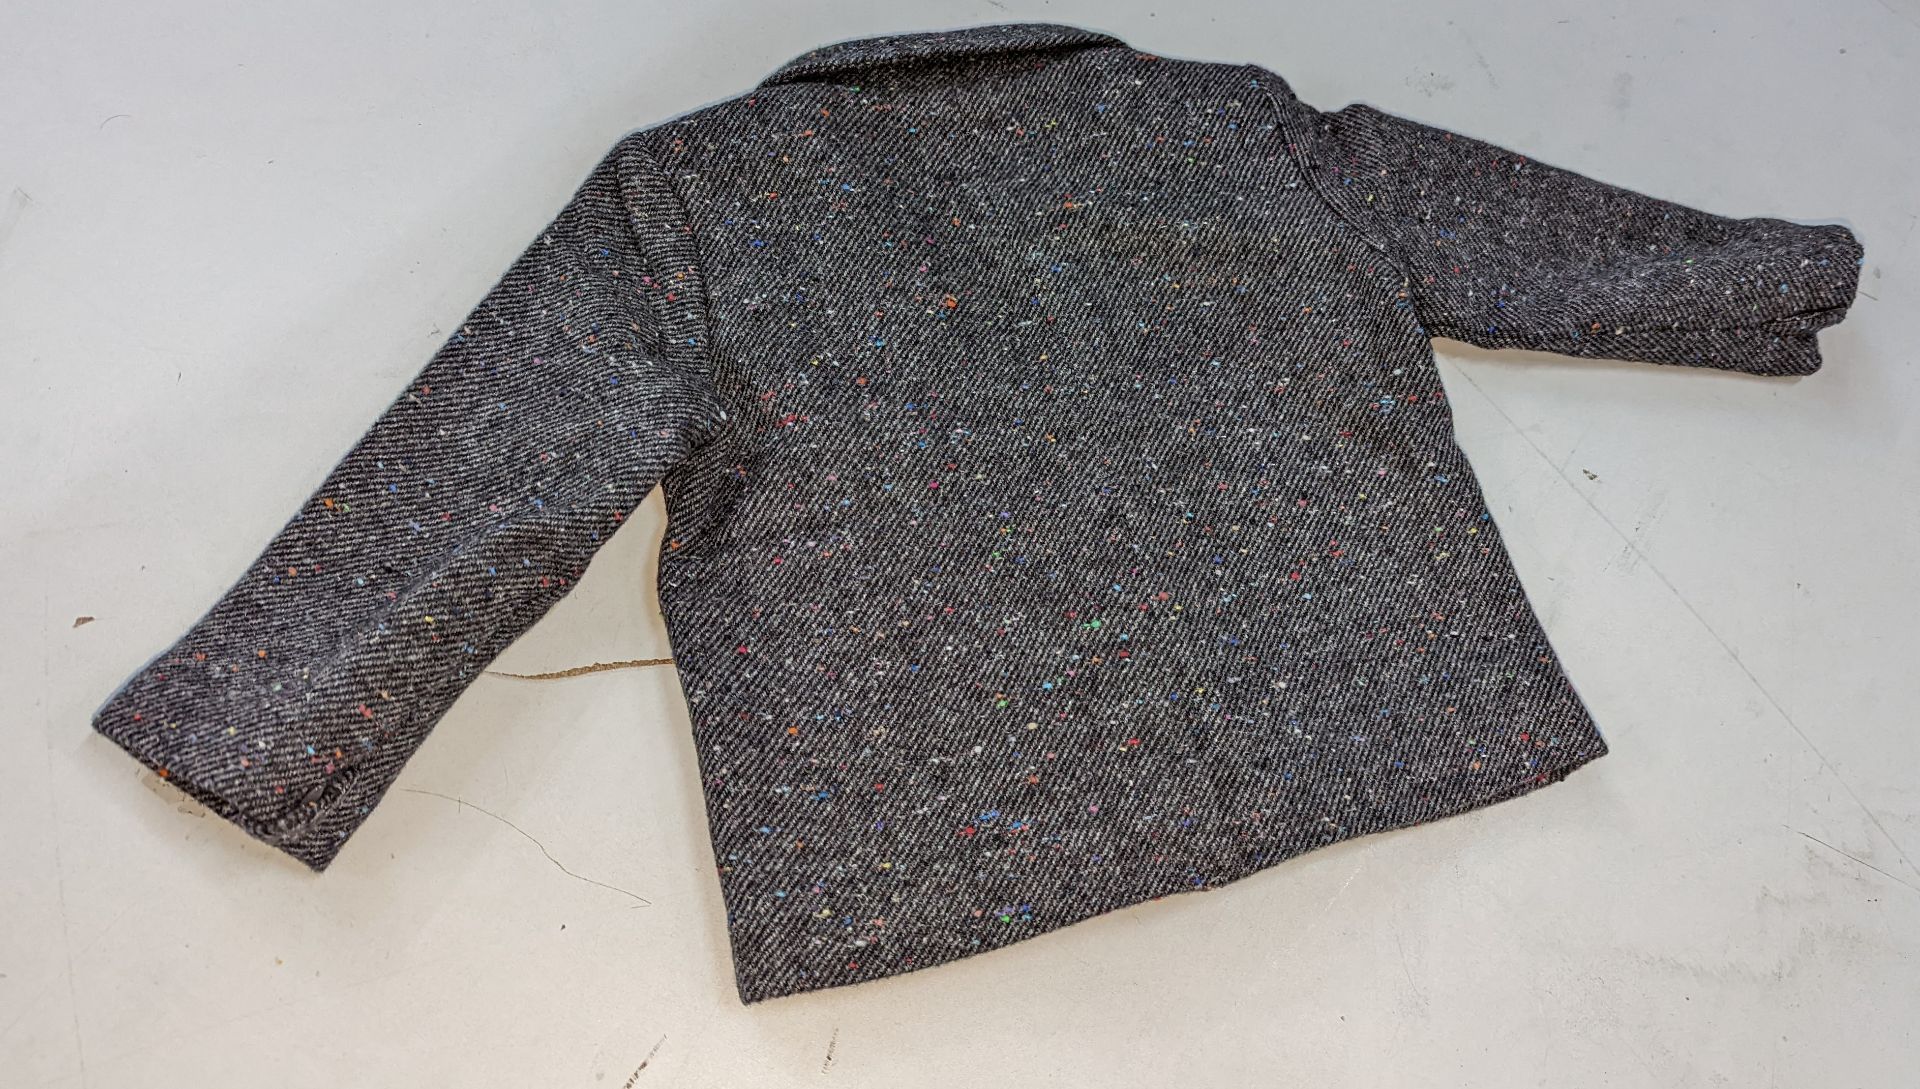 40 off Mosé Baby boy's blazers in grey/black with speckled colours running throughout with Mosé Baby - Image 3 of 9